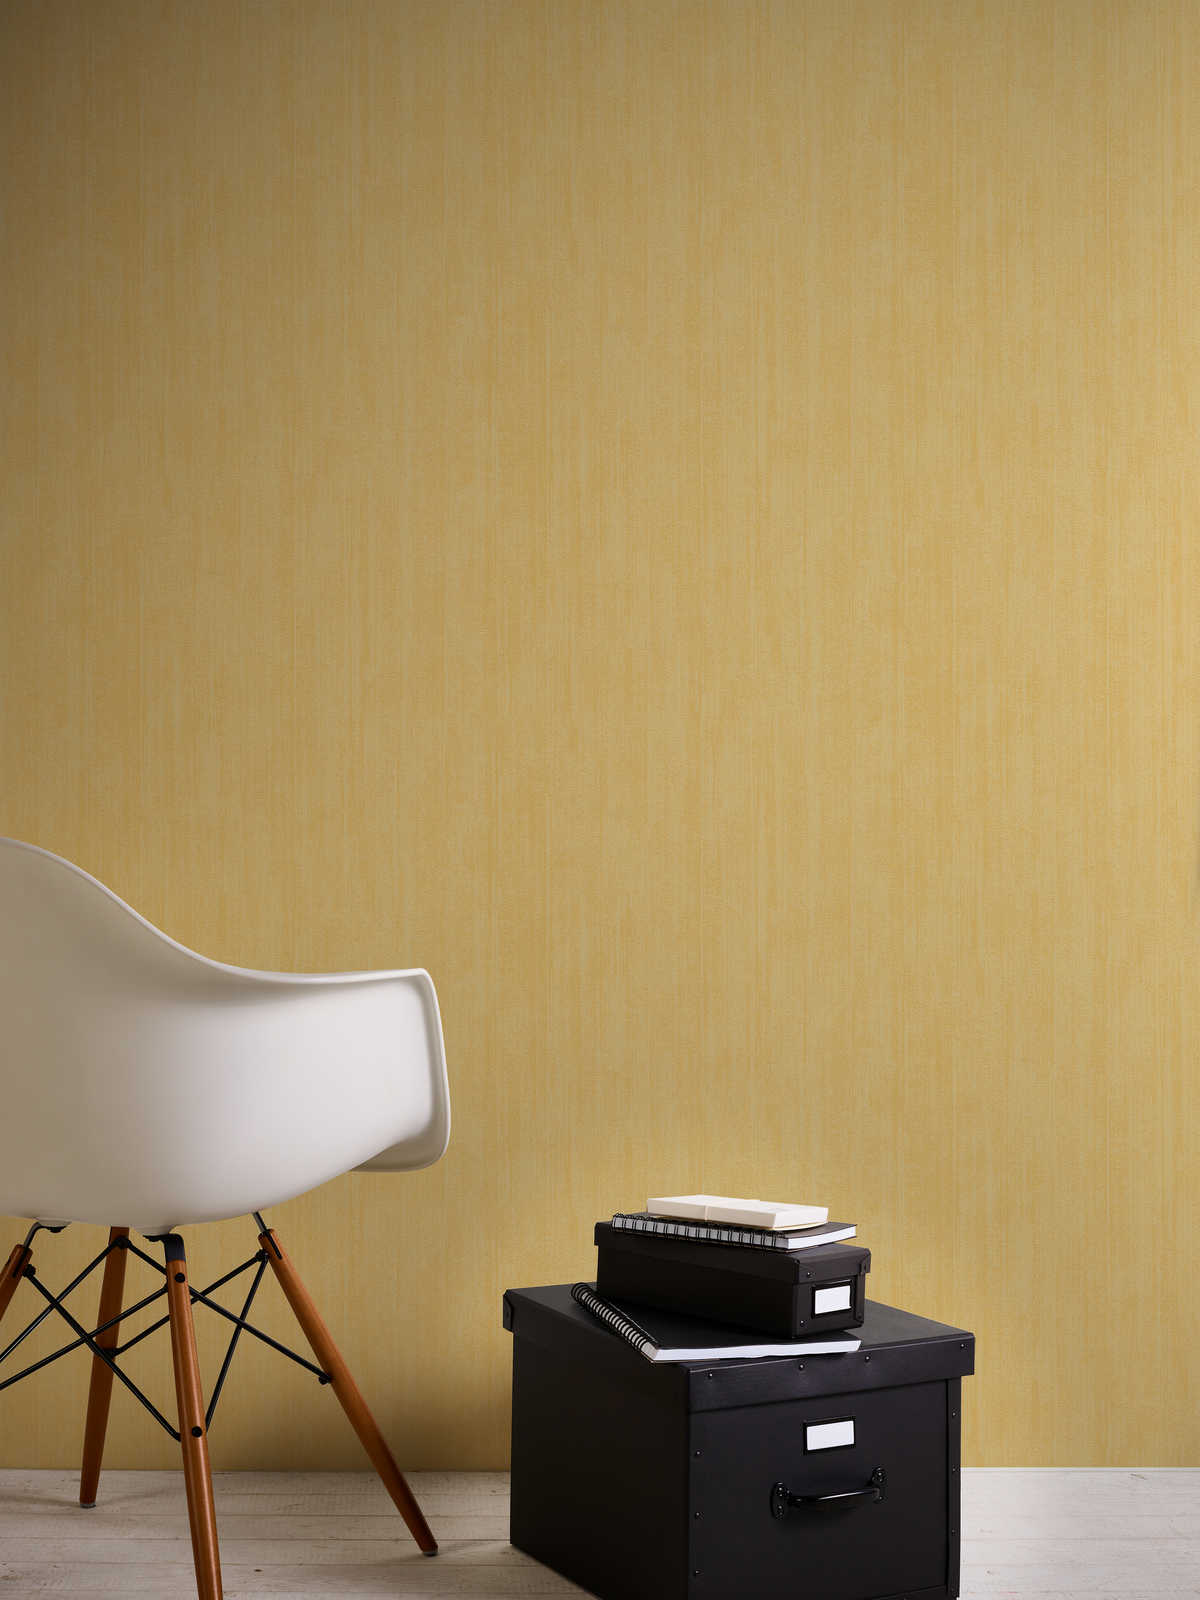             Wallpaper with foam structure in mottled texture - yellow
        